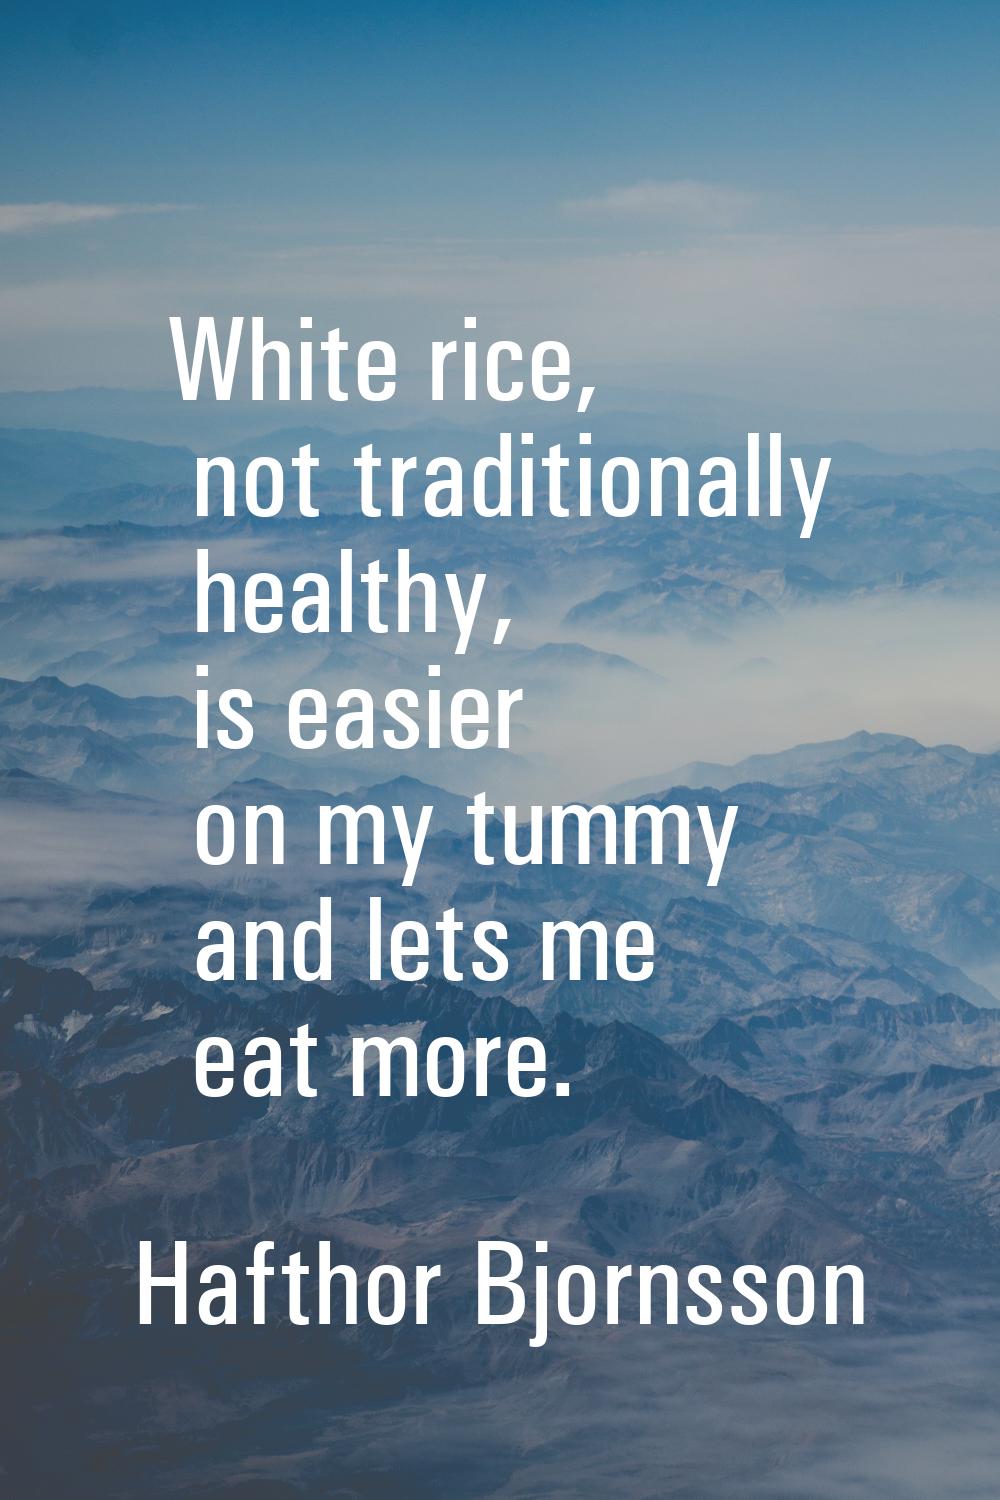 White rice, not traditionally healthy, is easier on my tummy and lets me eat more.